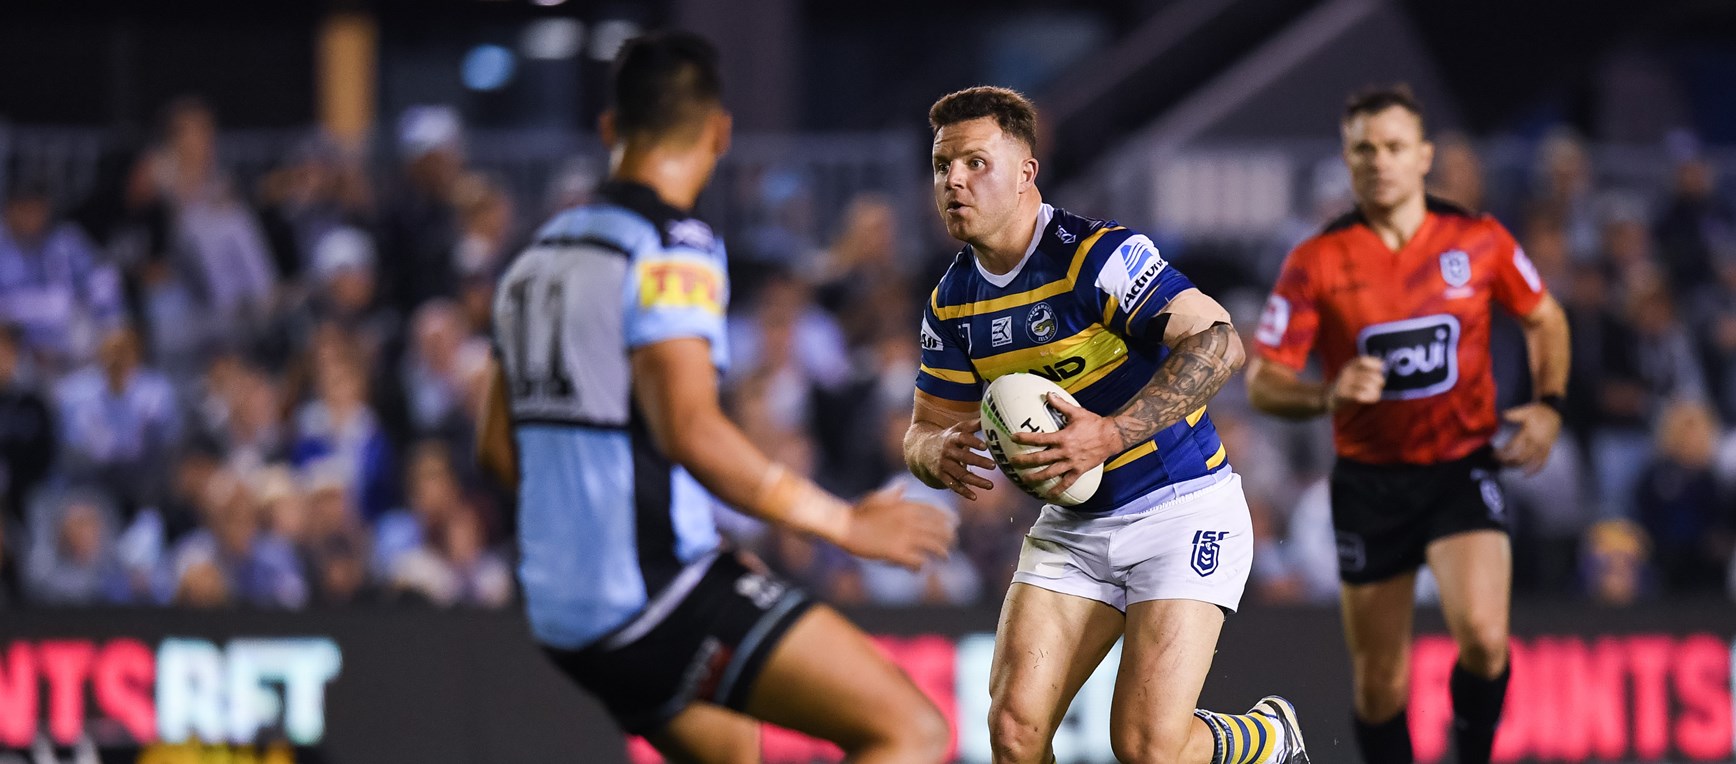 Sharks v Eels, Round 13 in photos